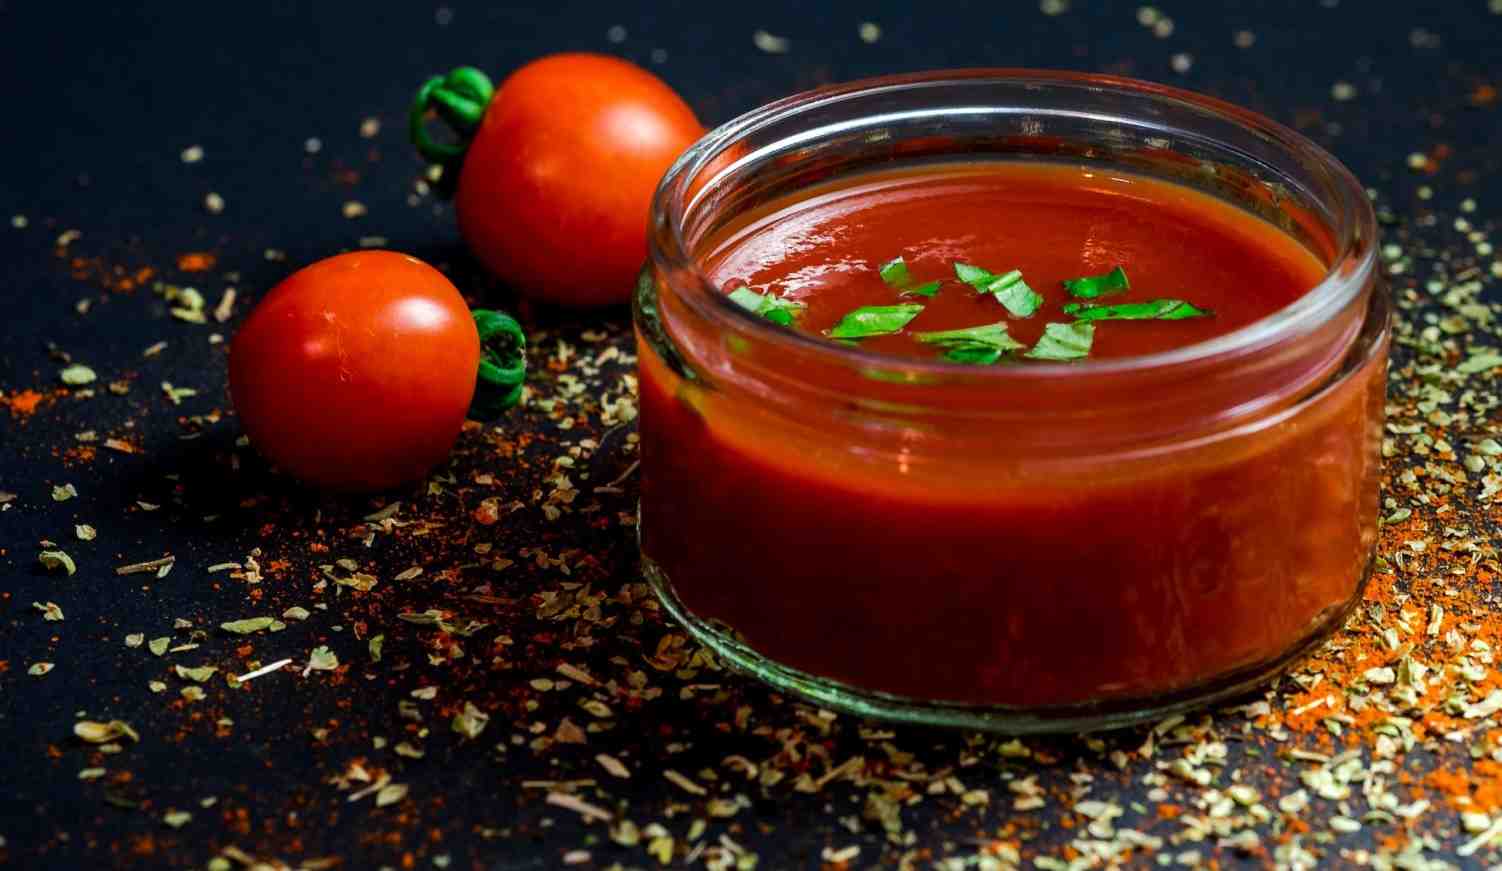 Homemade tomato sauce with canned diced tomatoes